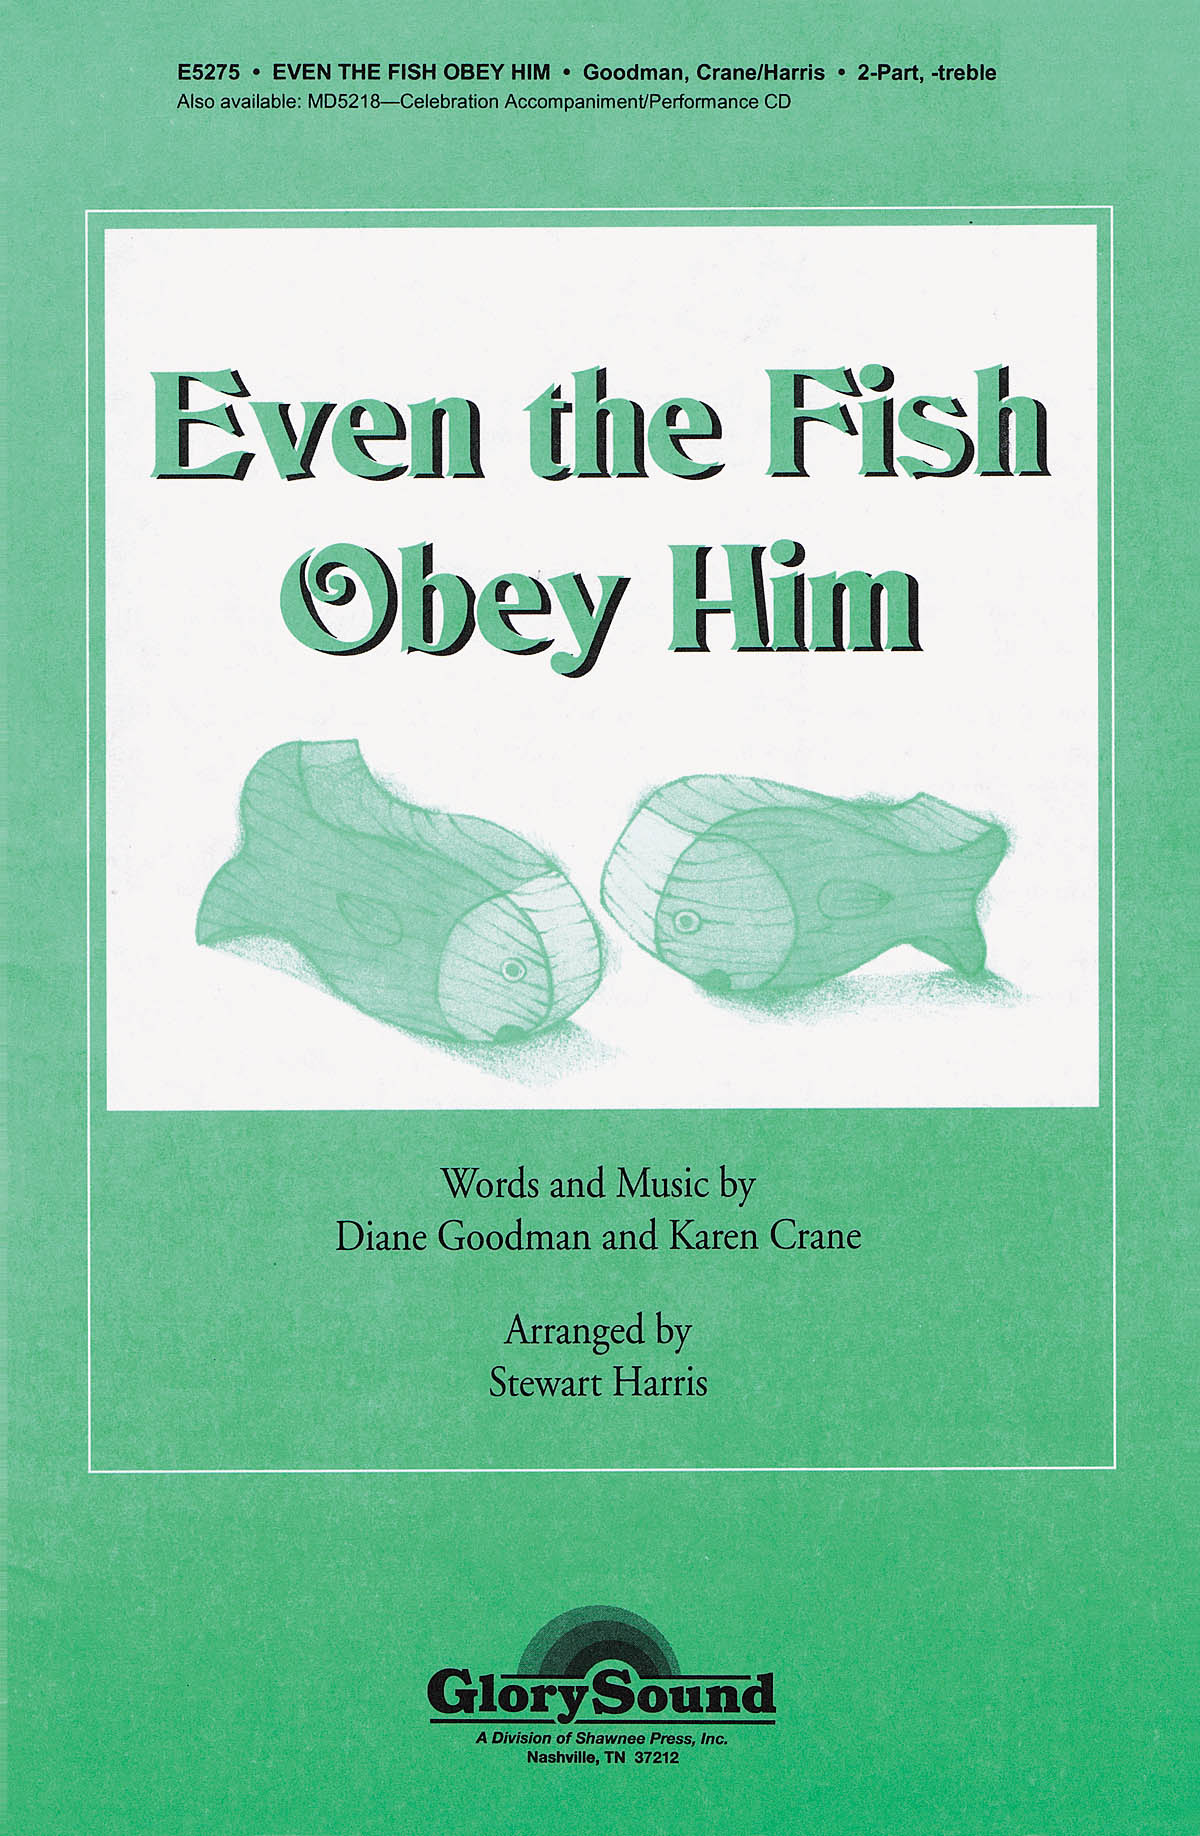 Even the Fish Obey Him